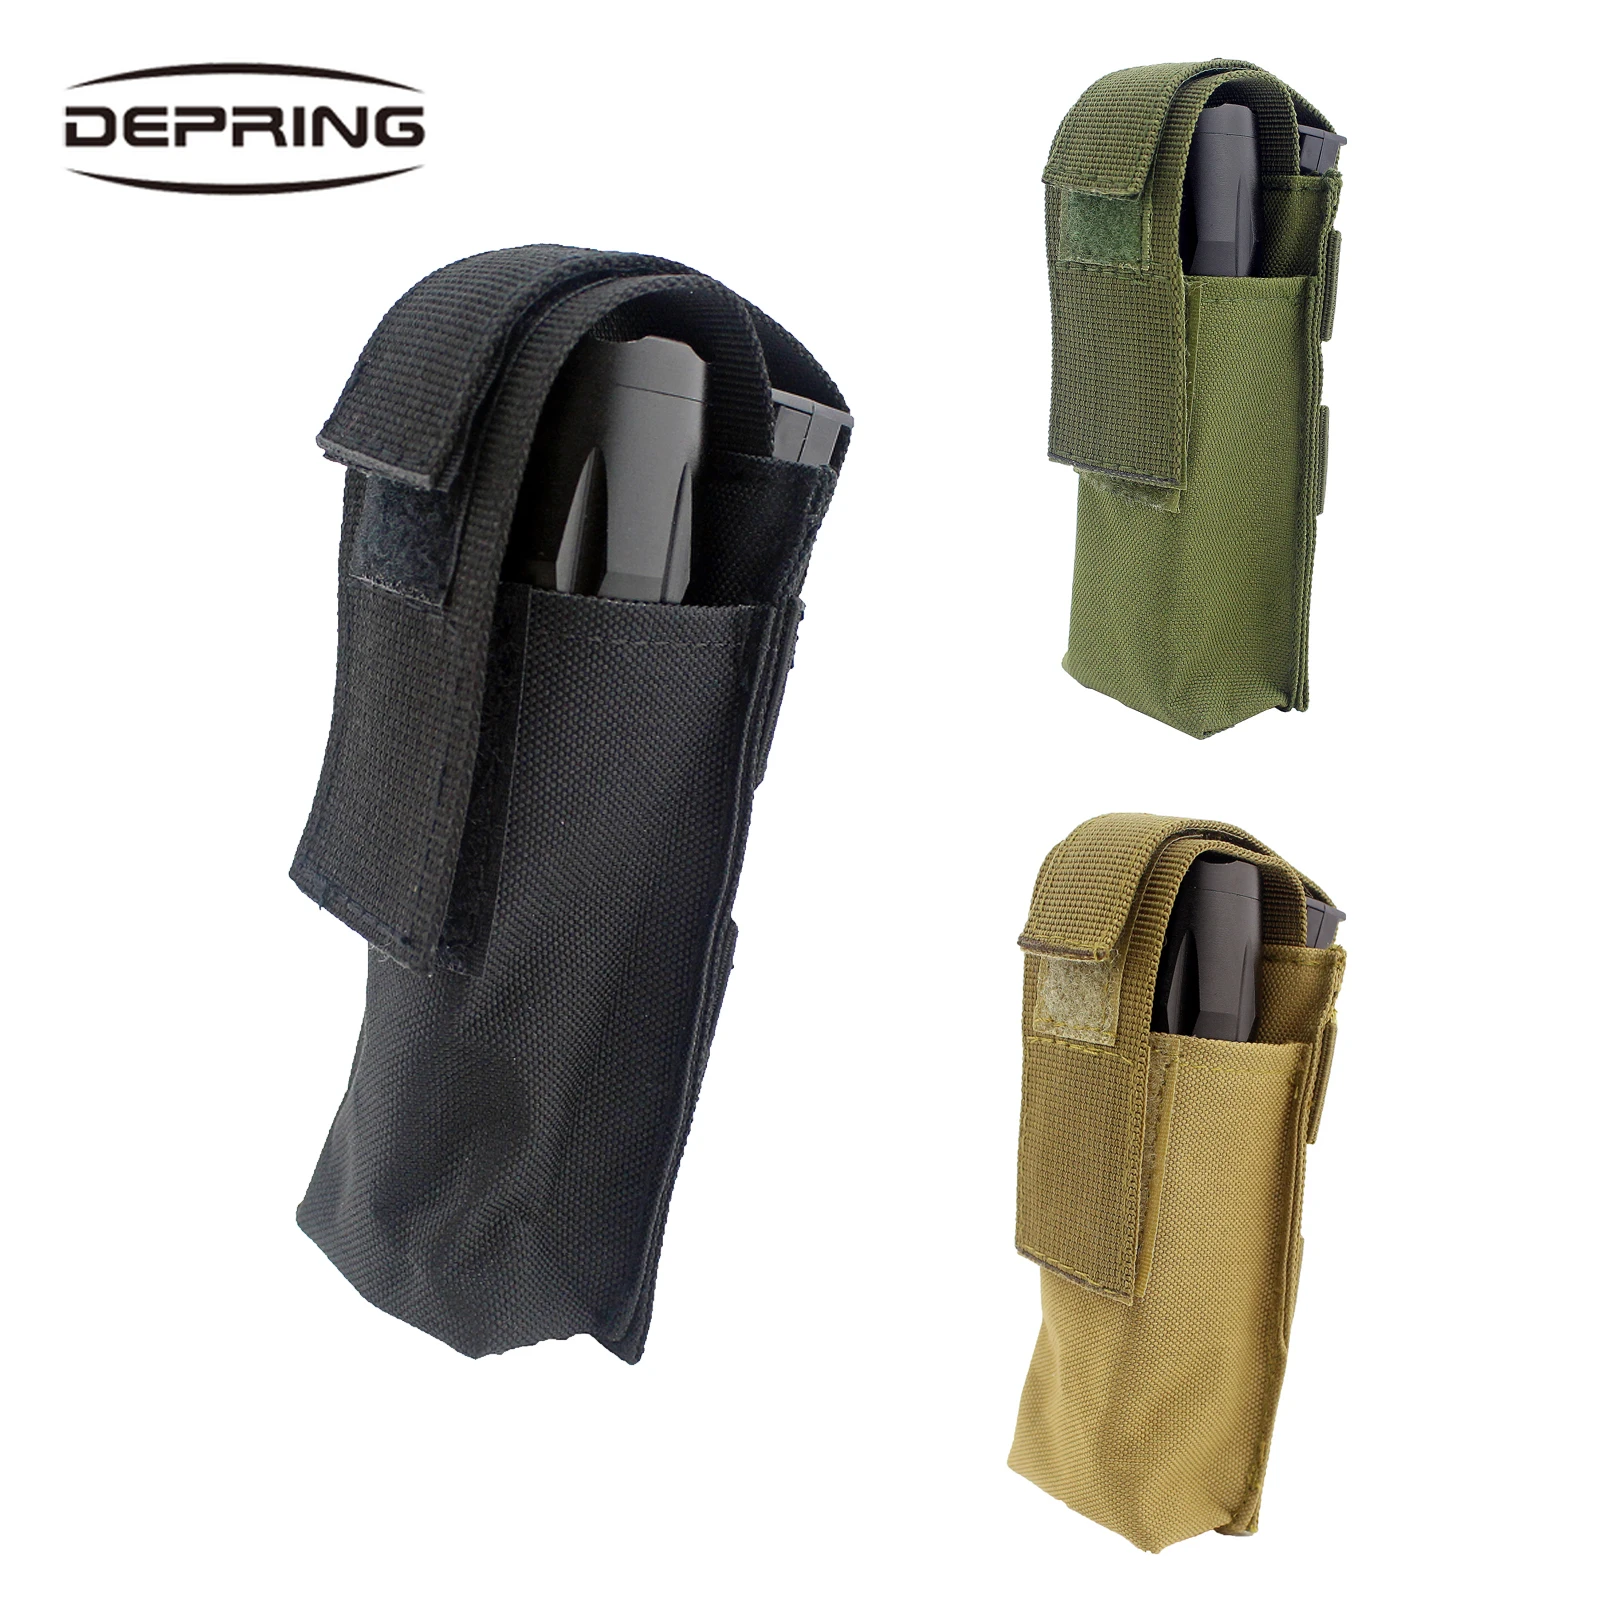 

Camping Hiking Torch Flashlight Pack Tactical Military Portable Durable Medical EMT Scissor Pouch Bag Small Knife Holding Bag